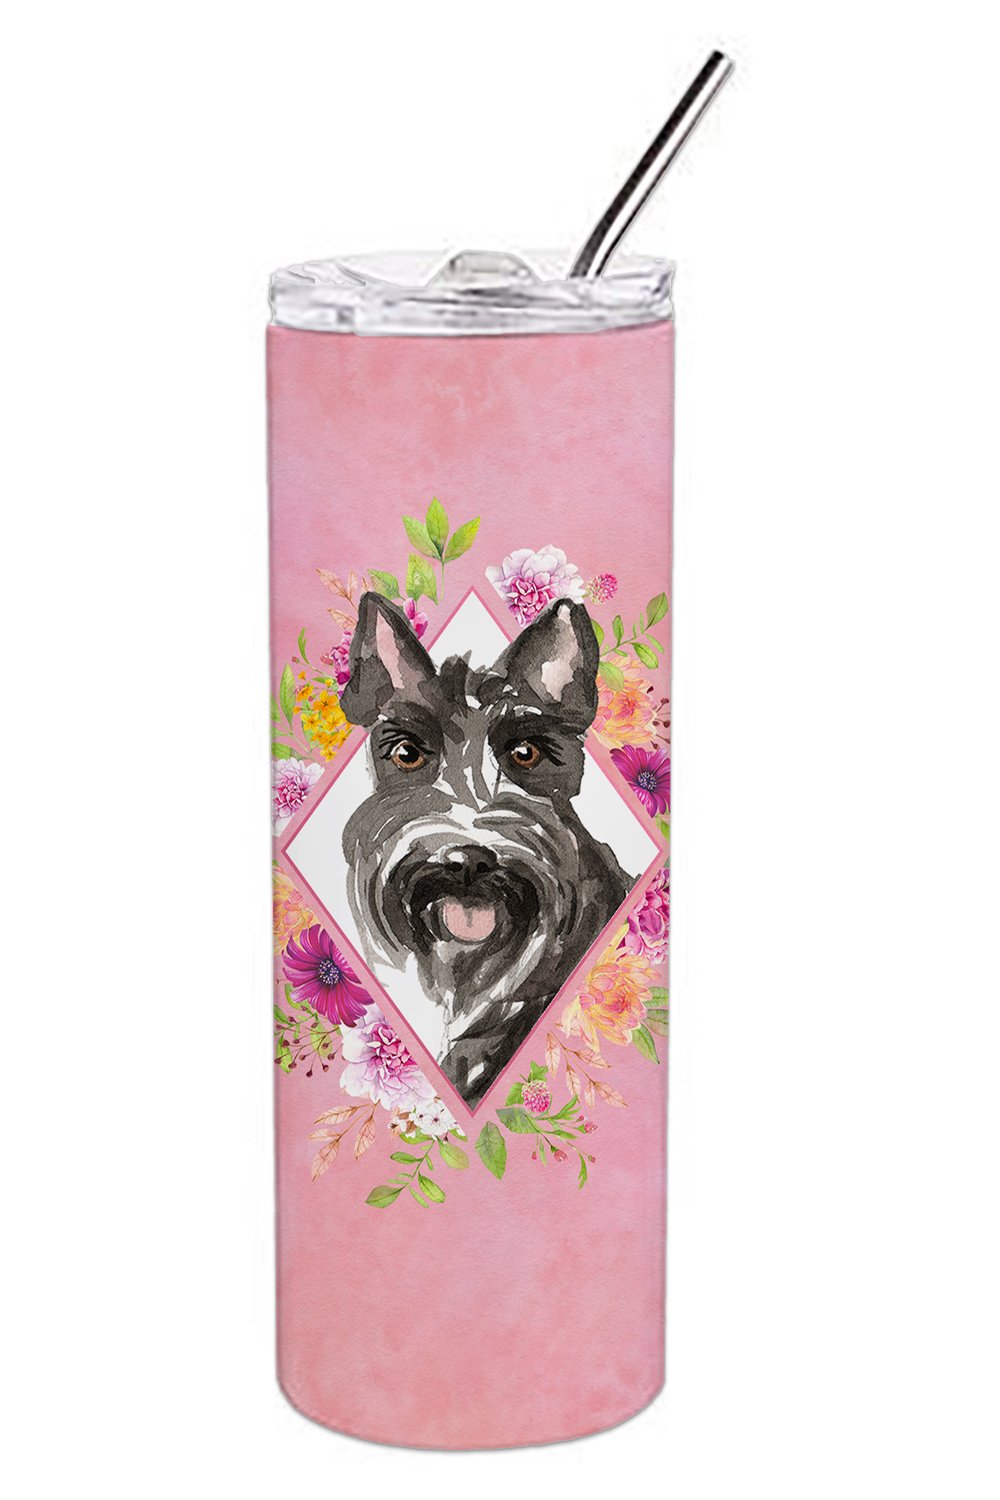 Scottish Terrier Pink Flowers Double Walled Stainless Steel 20 oz Skinny Tumbler CK4214TBL20 by Caroline's Treasures